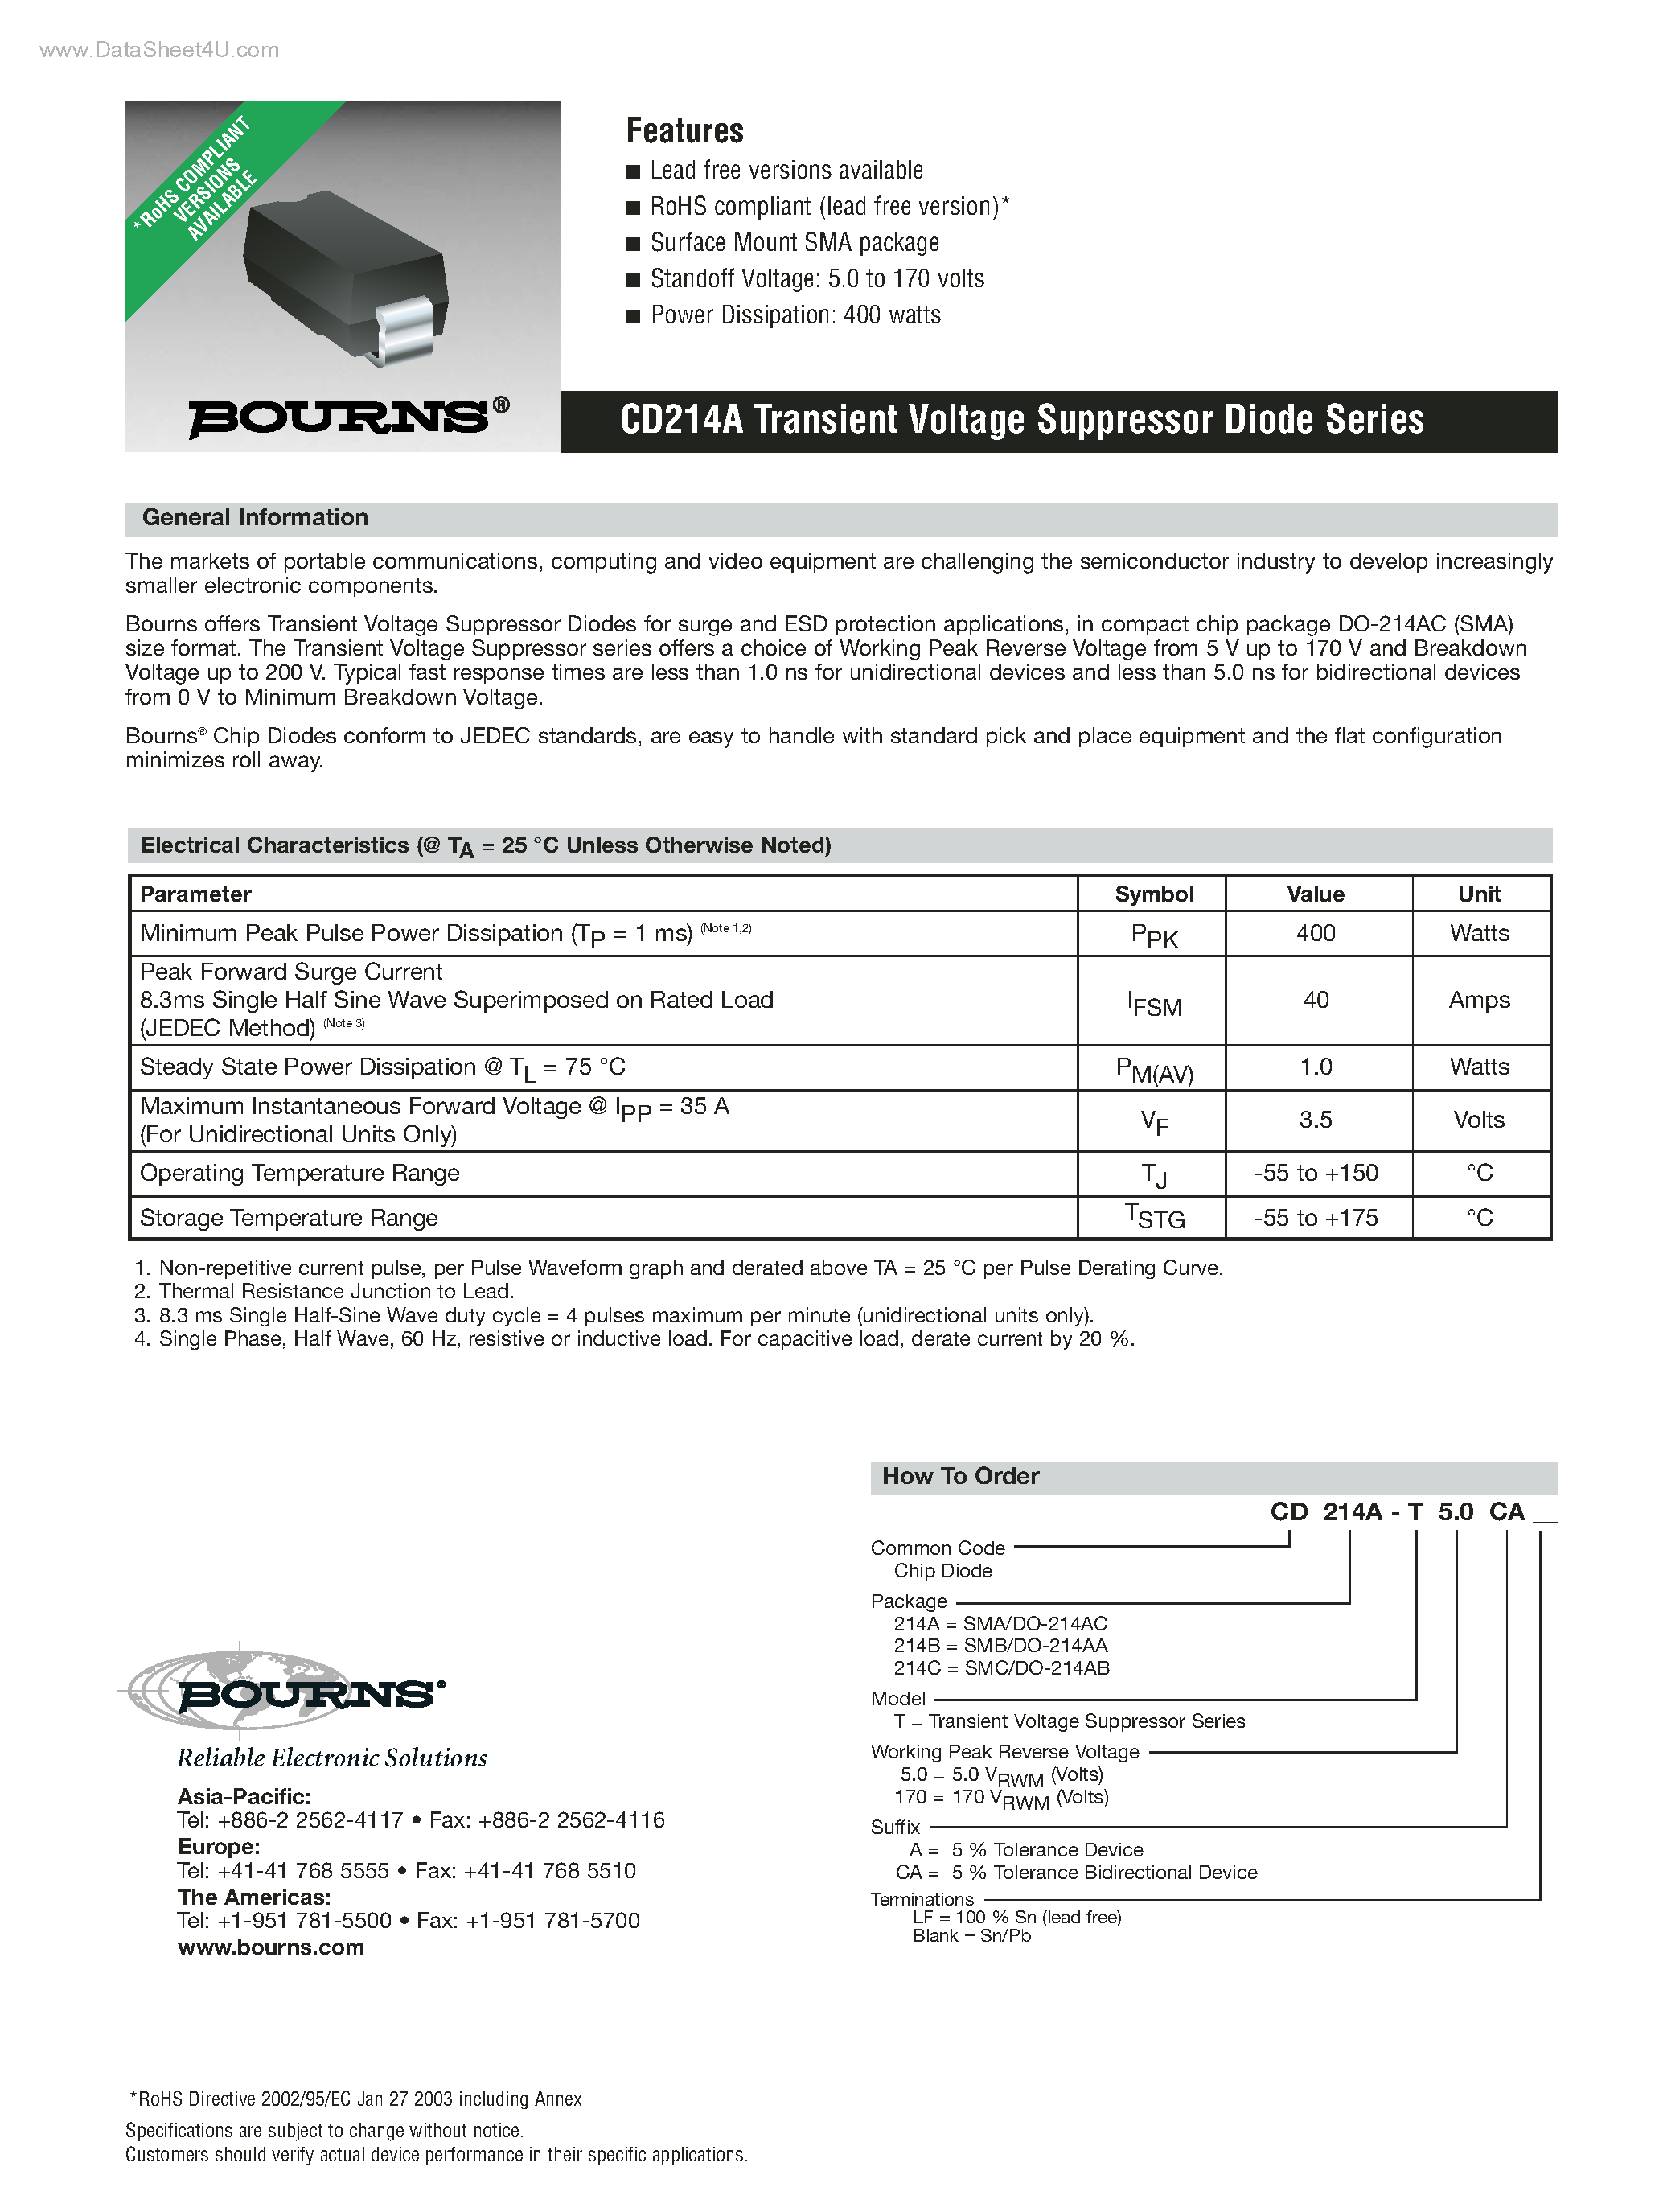 Datasheet CD214A - Transient Voltage Suppressor Diode Series page 1